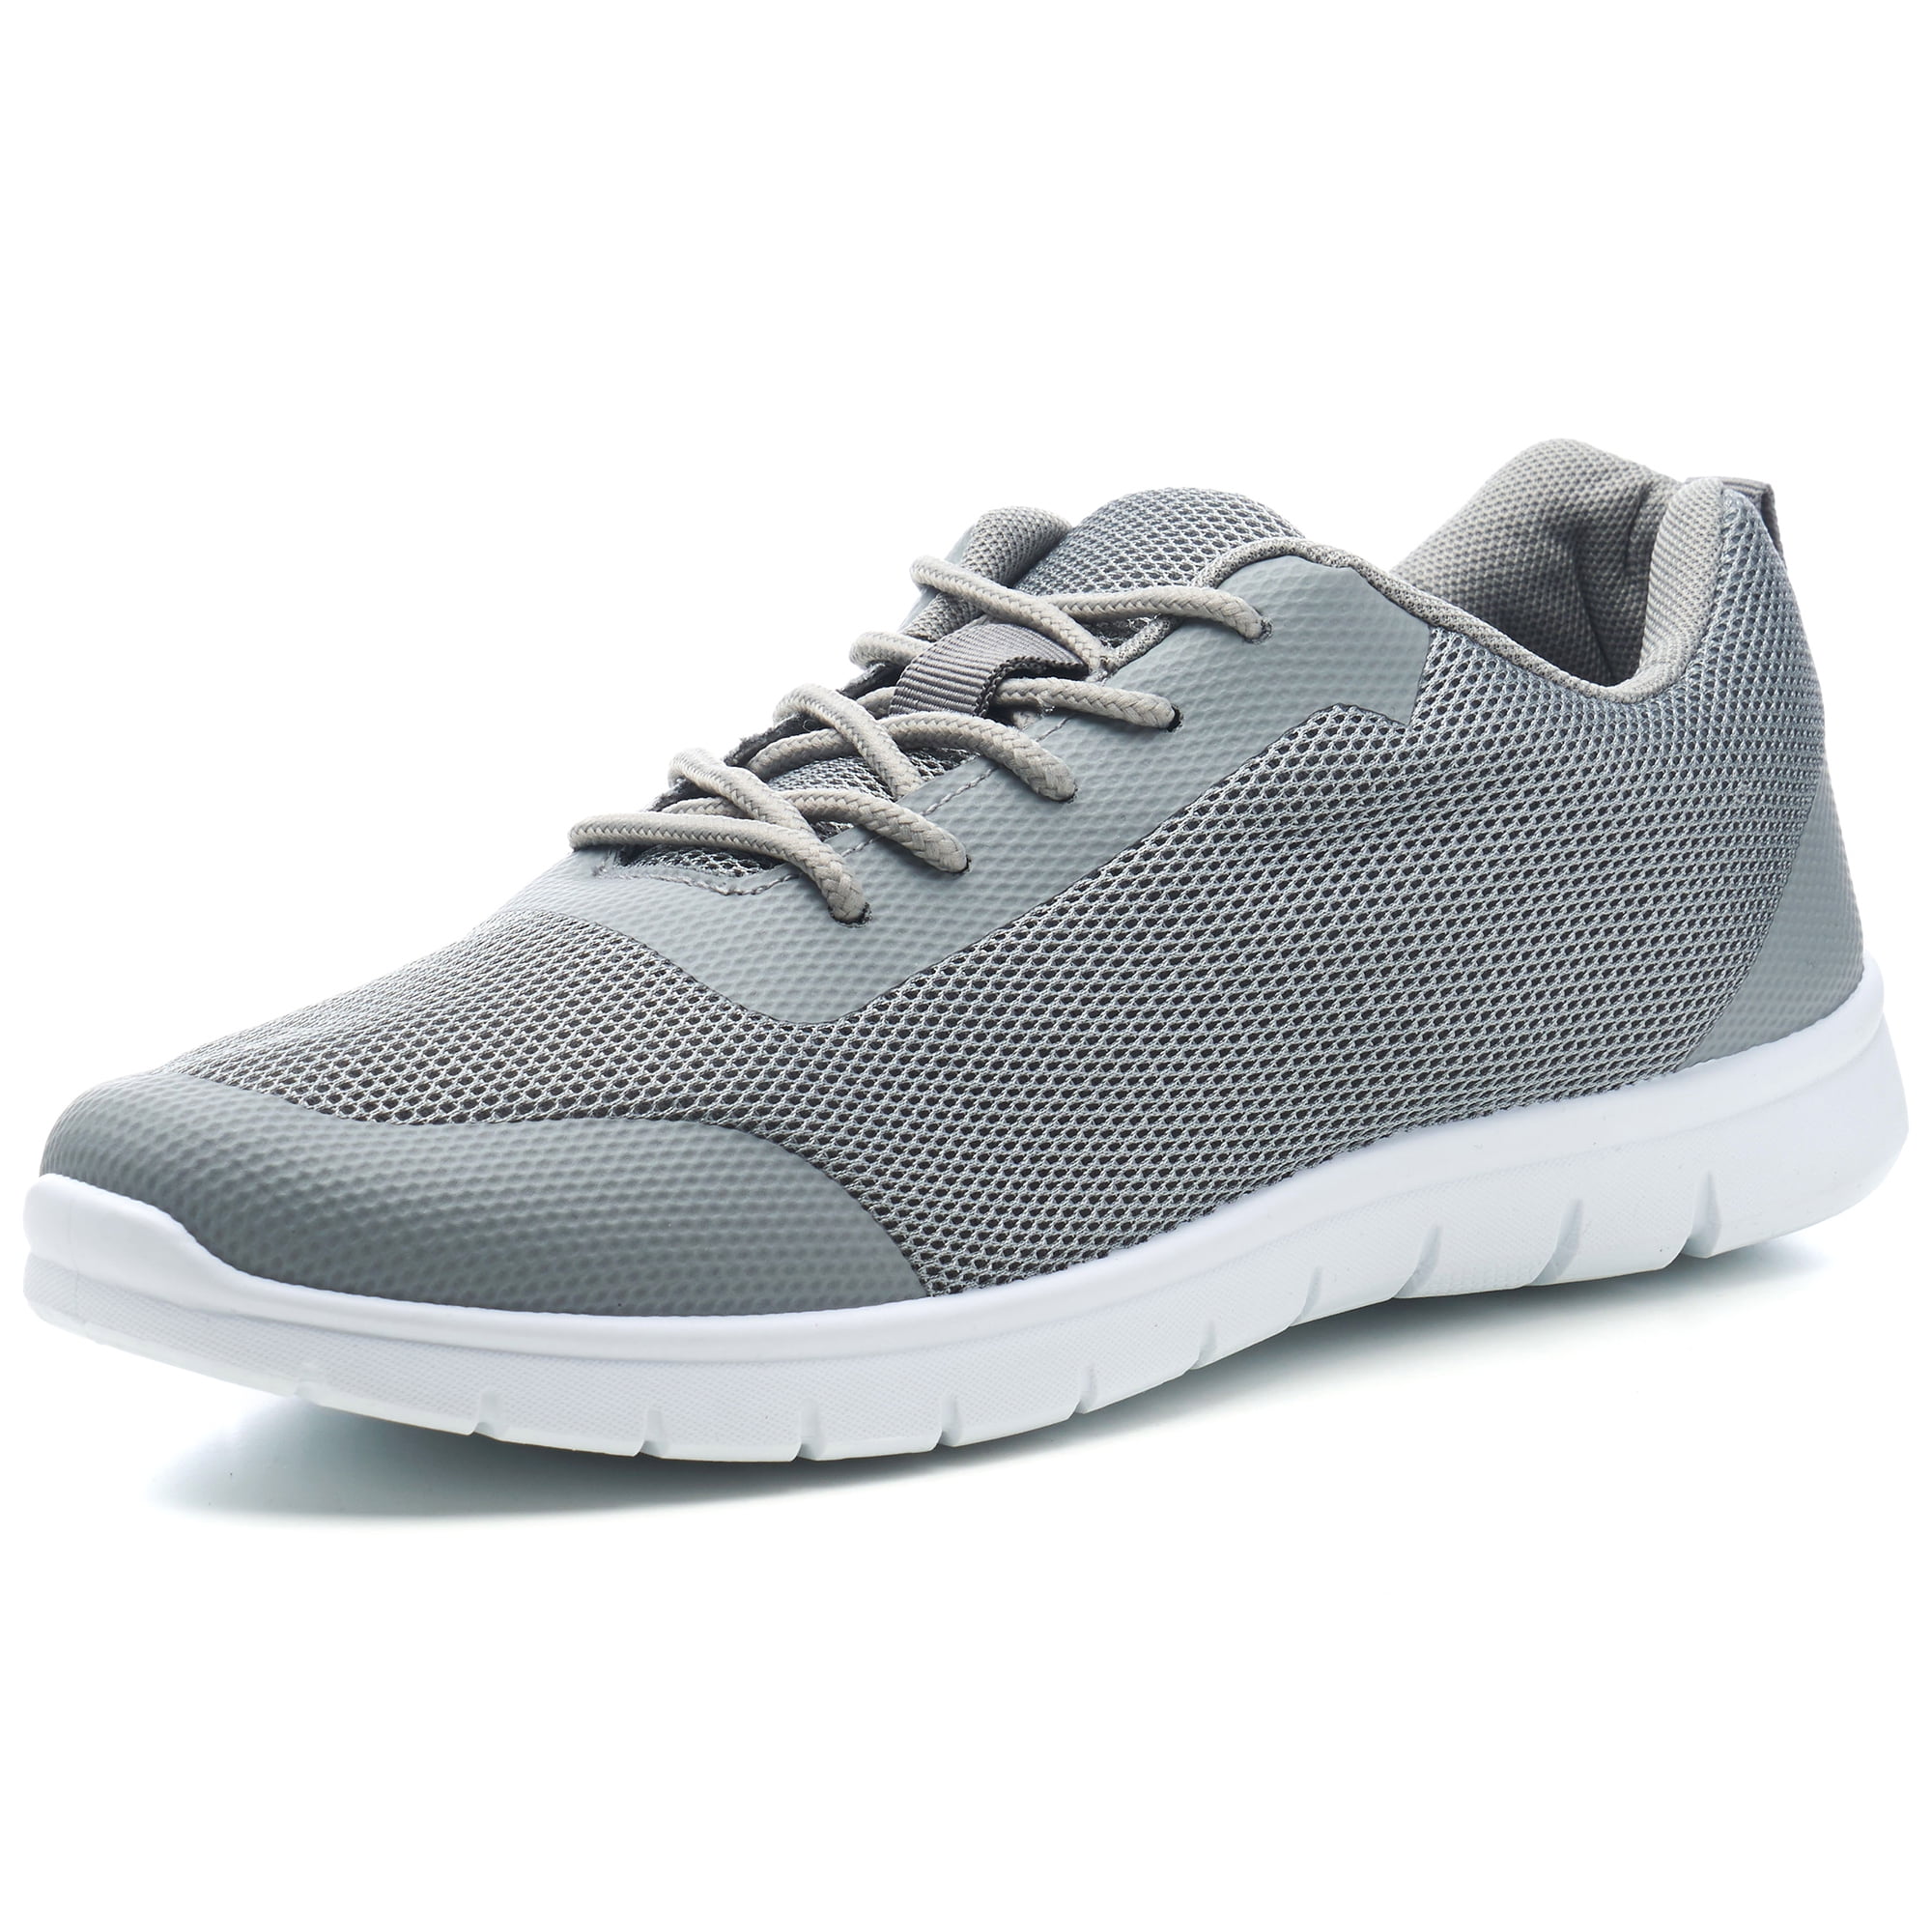  Alpine Swiss Kyle Mens Lightweight Athletic Knit Fashion  Sneakers | Shoes